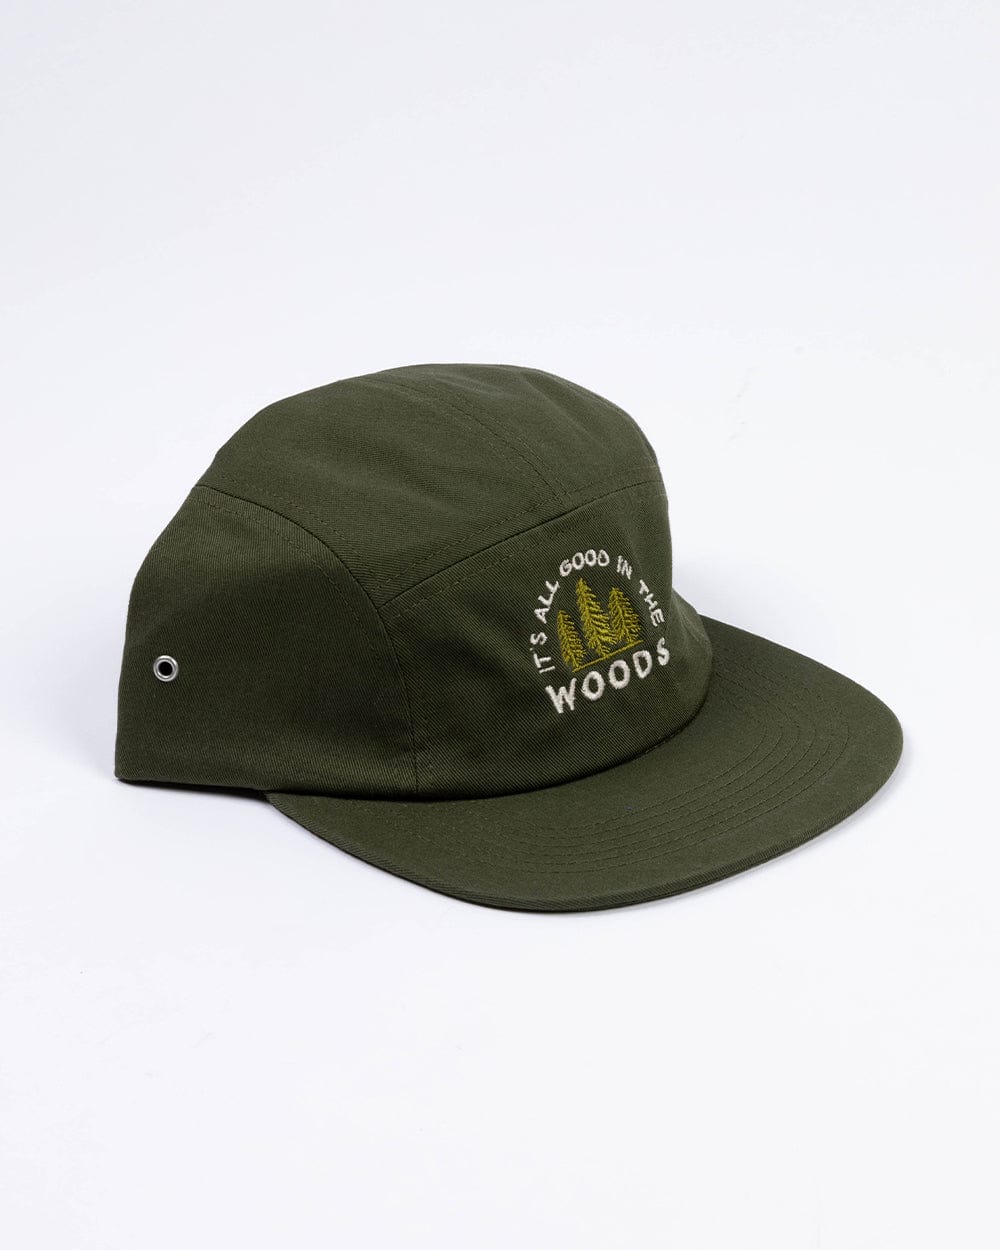 Keep Nature Wild Hat Good in the Woods Camper Hat | Olive